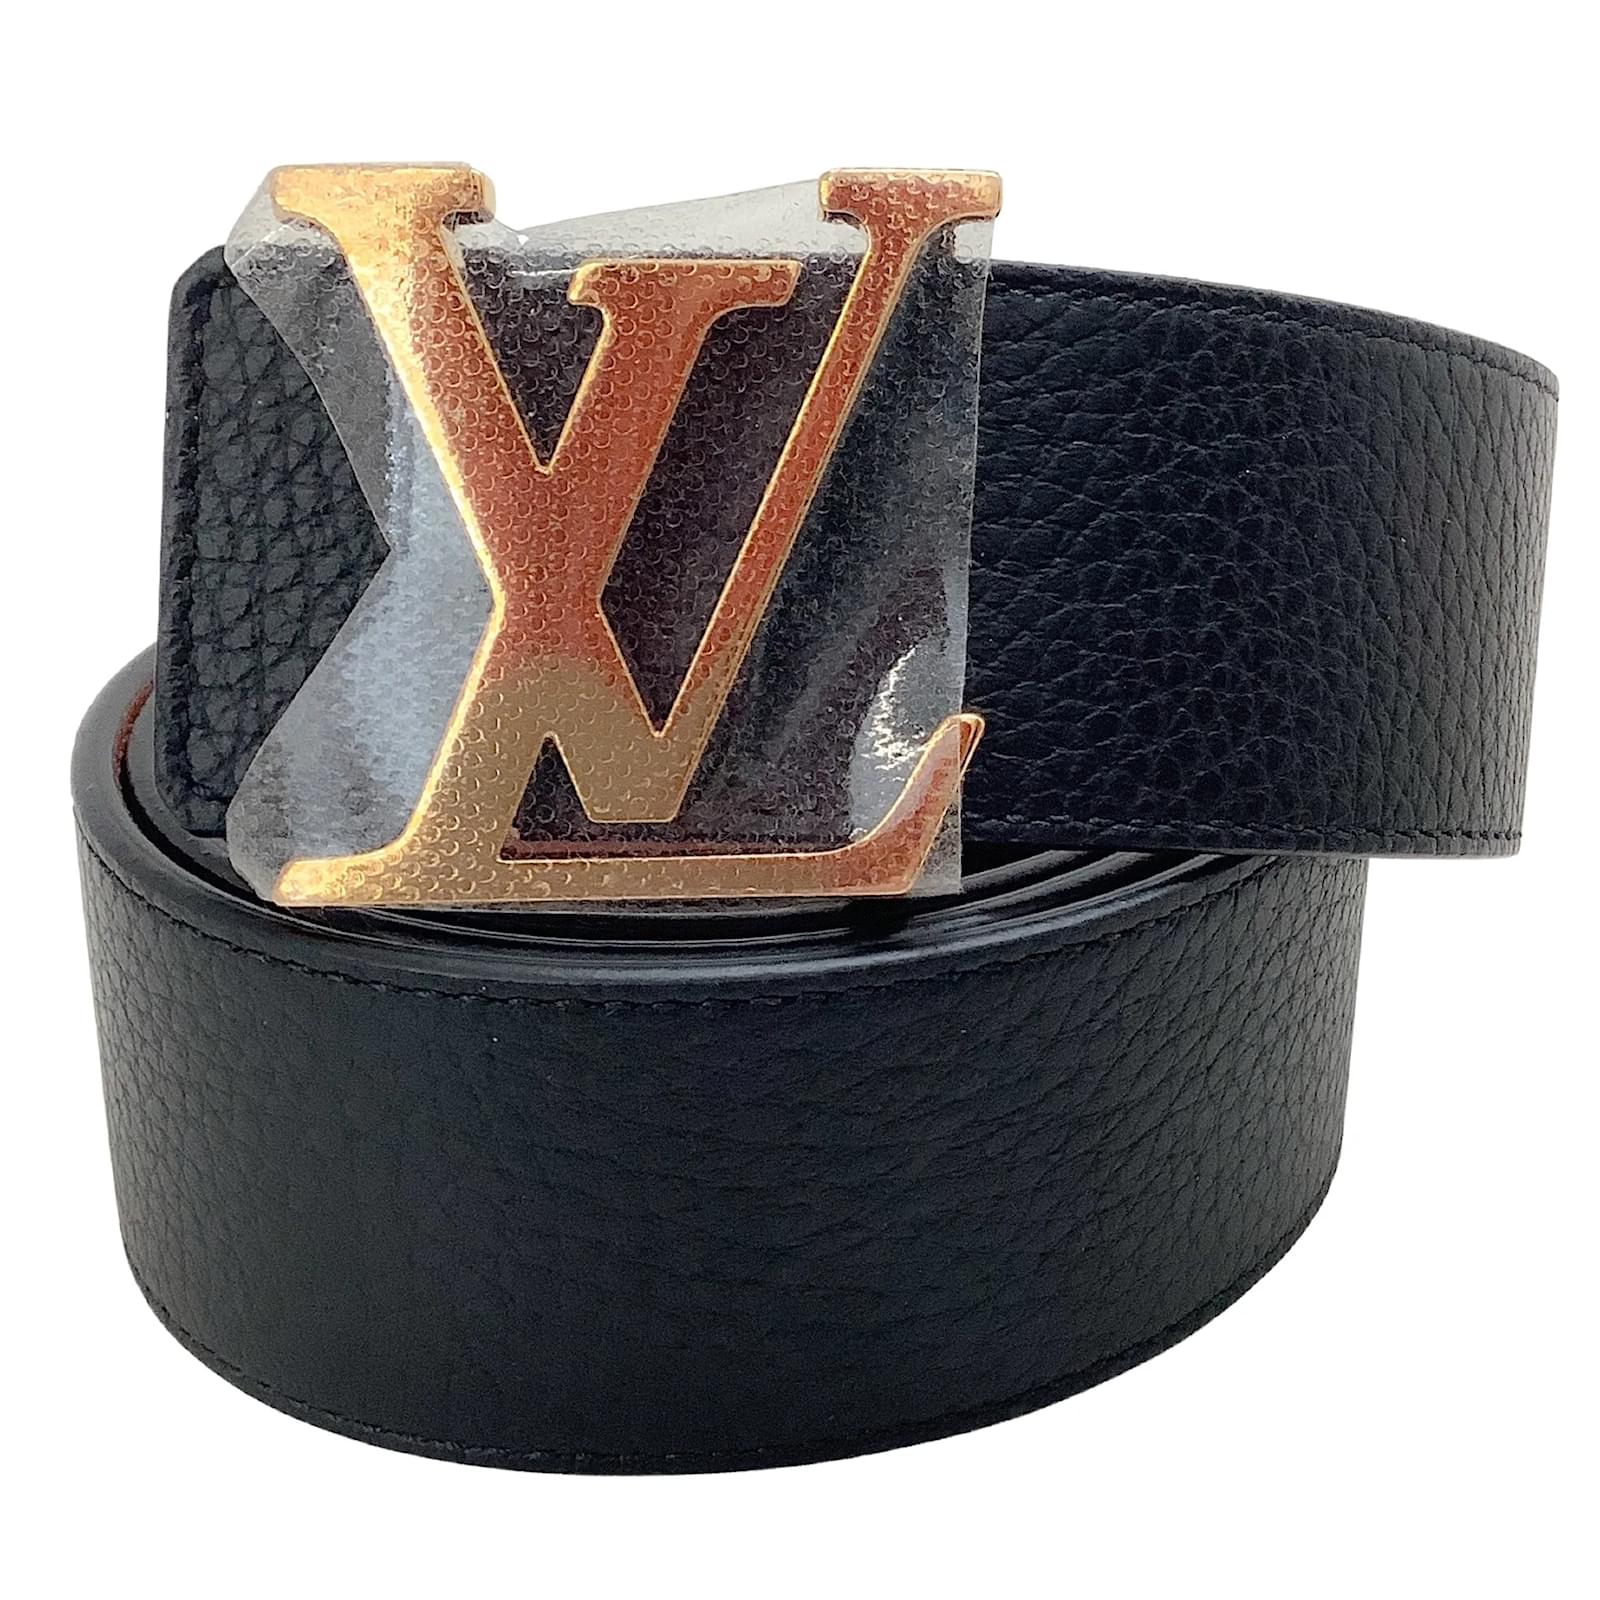 Louis Vuitton Name Tag w/ SA Initials Black Leather Authentic